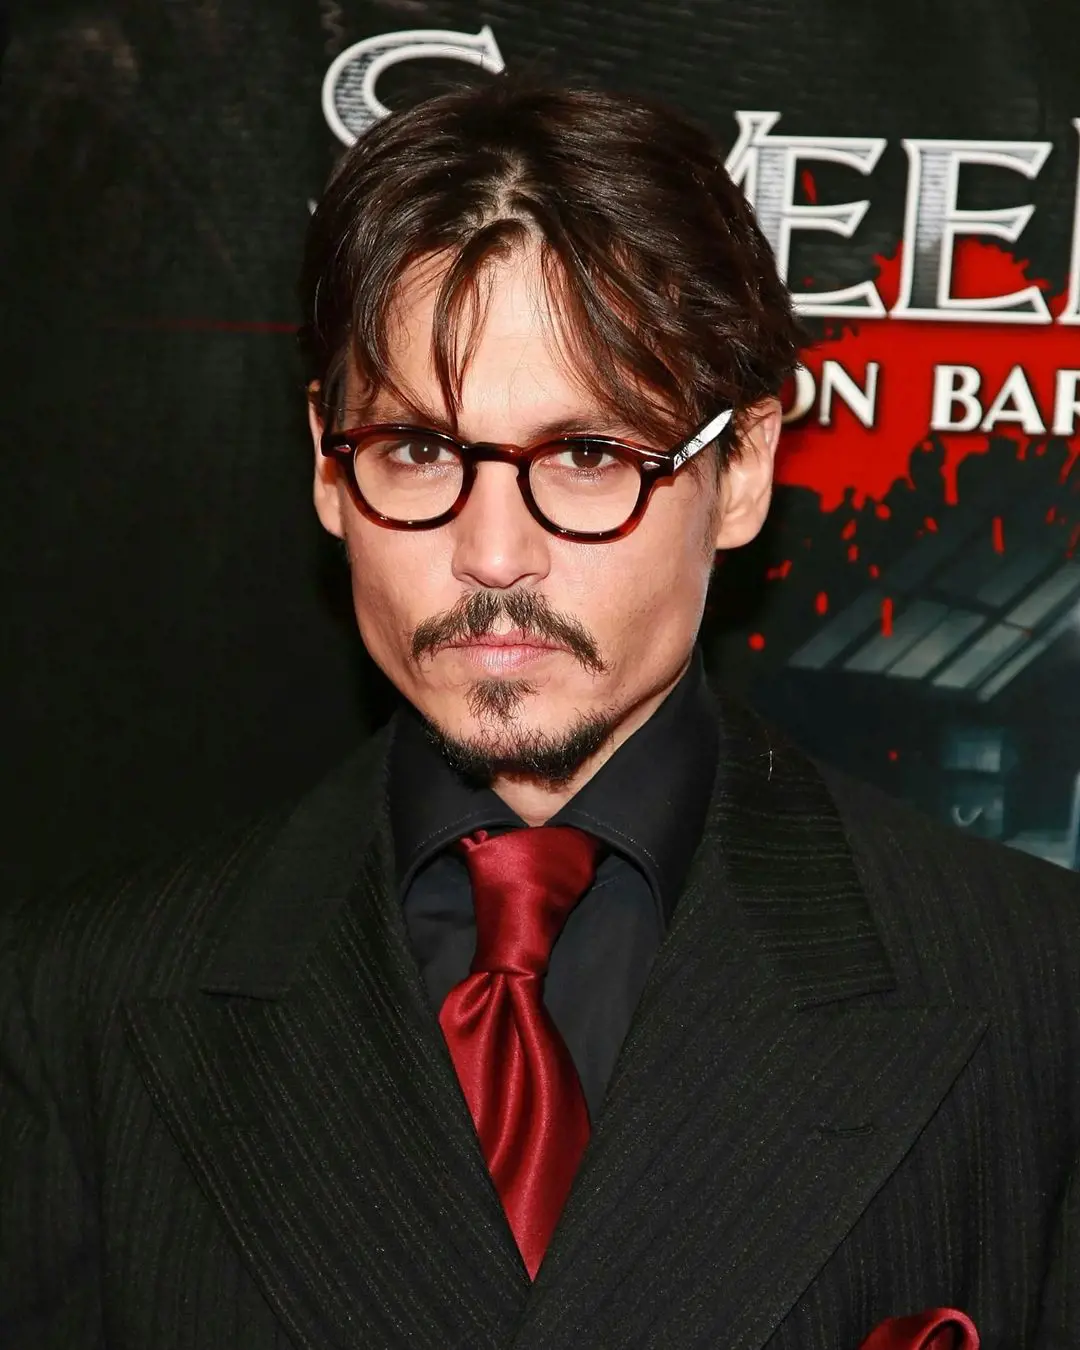 Depp attended the premiere of his movie 'Sweeney Todd' in New York on 3 December 2007 donned in a dark suit, and red tie